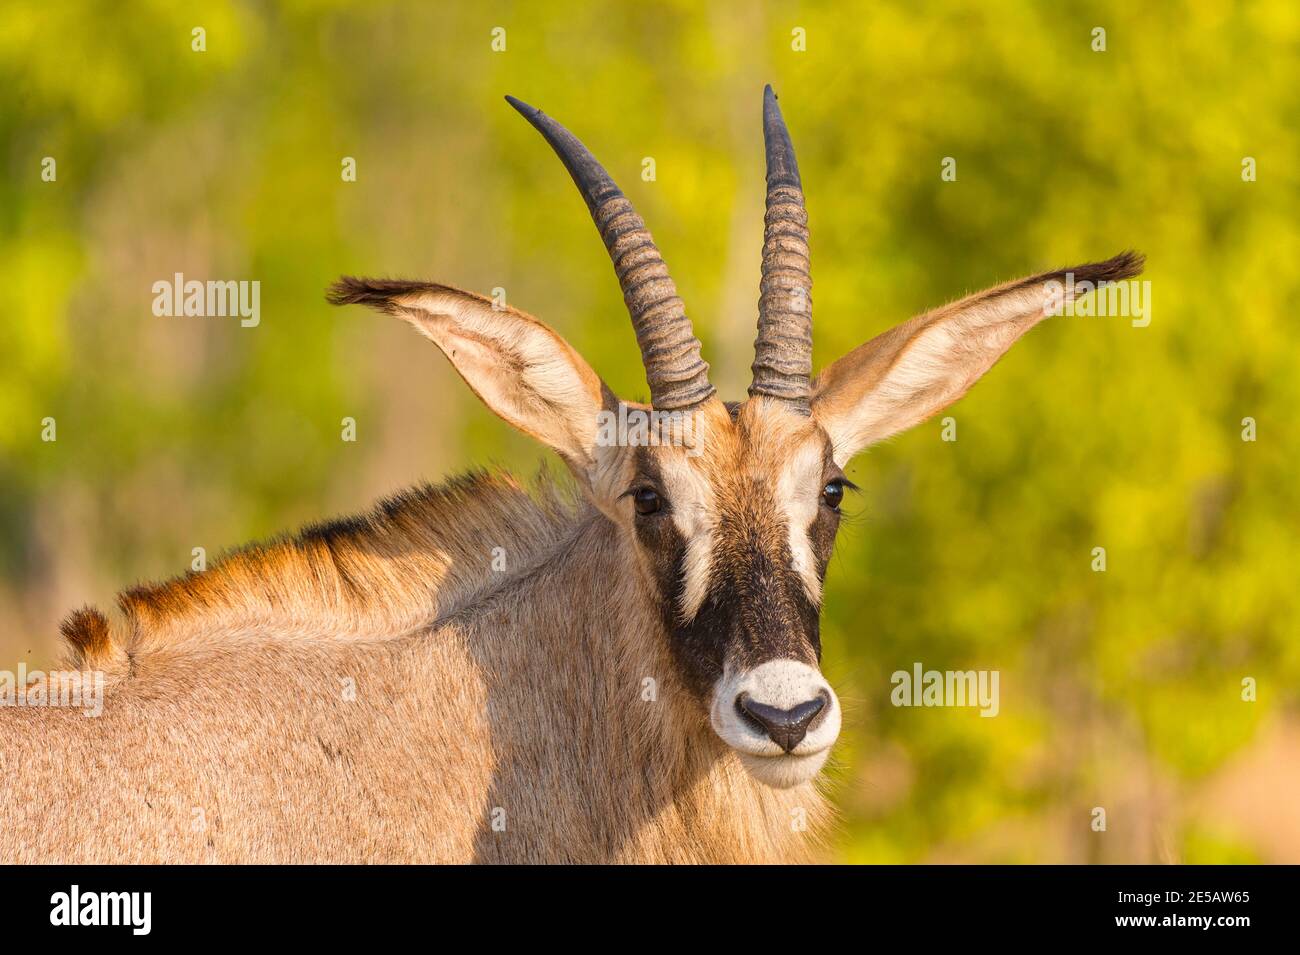 A close portrait of a male Roan Antelope Hippotragus equinus in Zimbabwe's Hwange National Park. Stock Photo